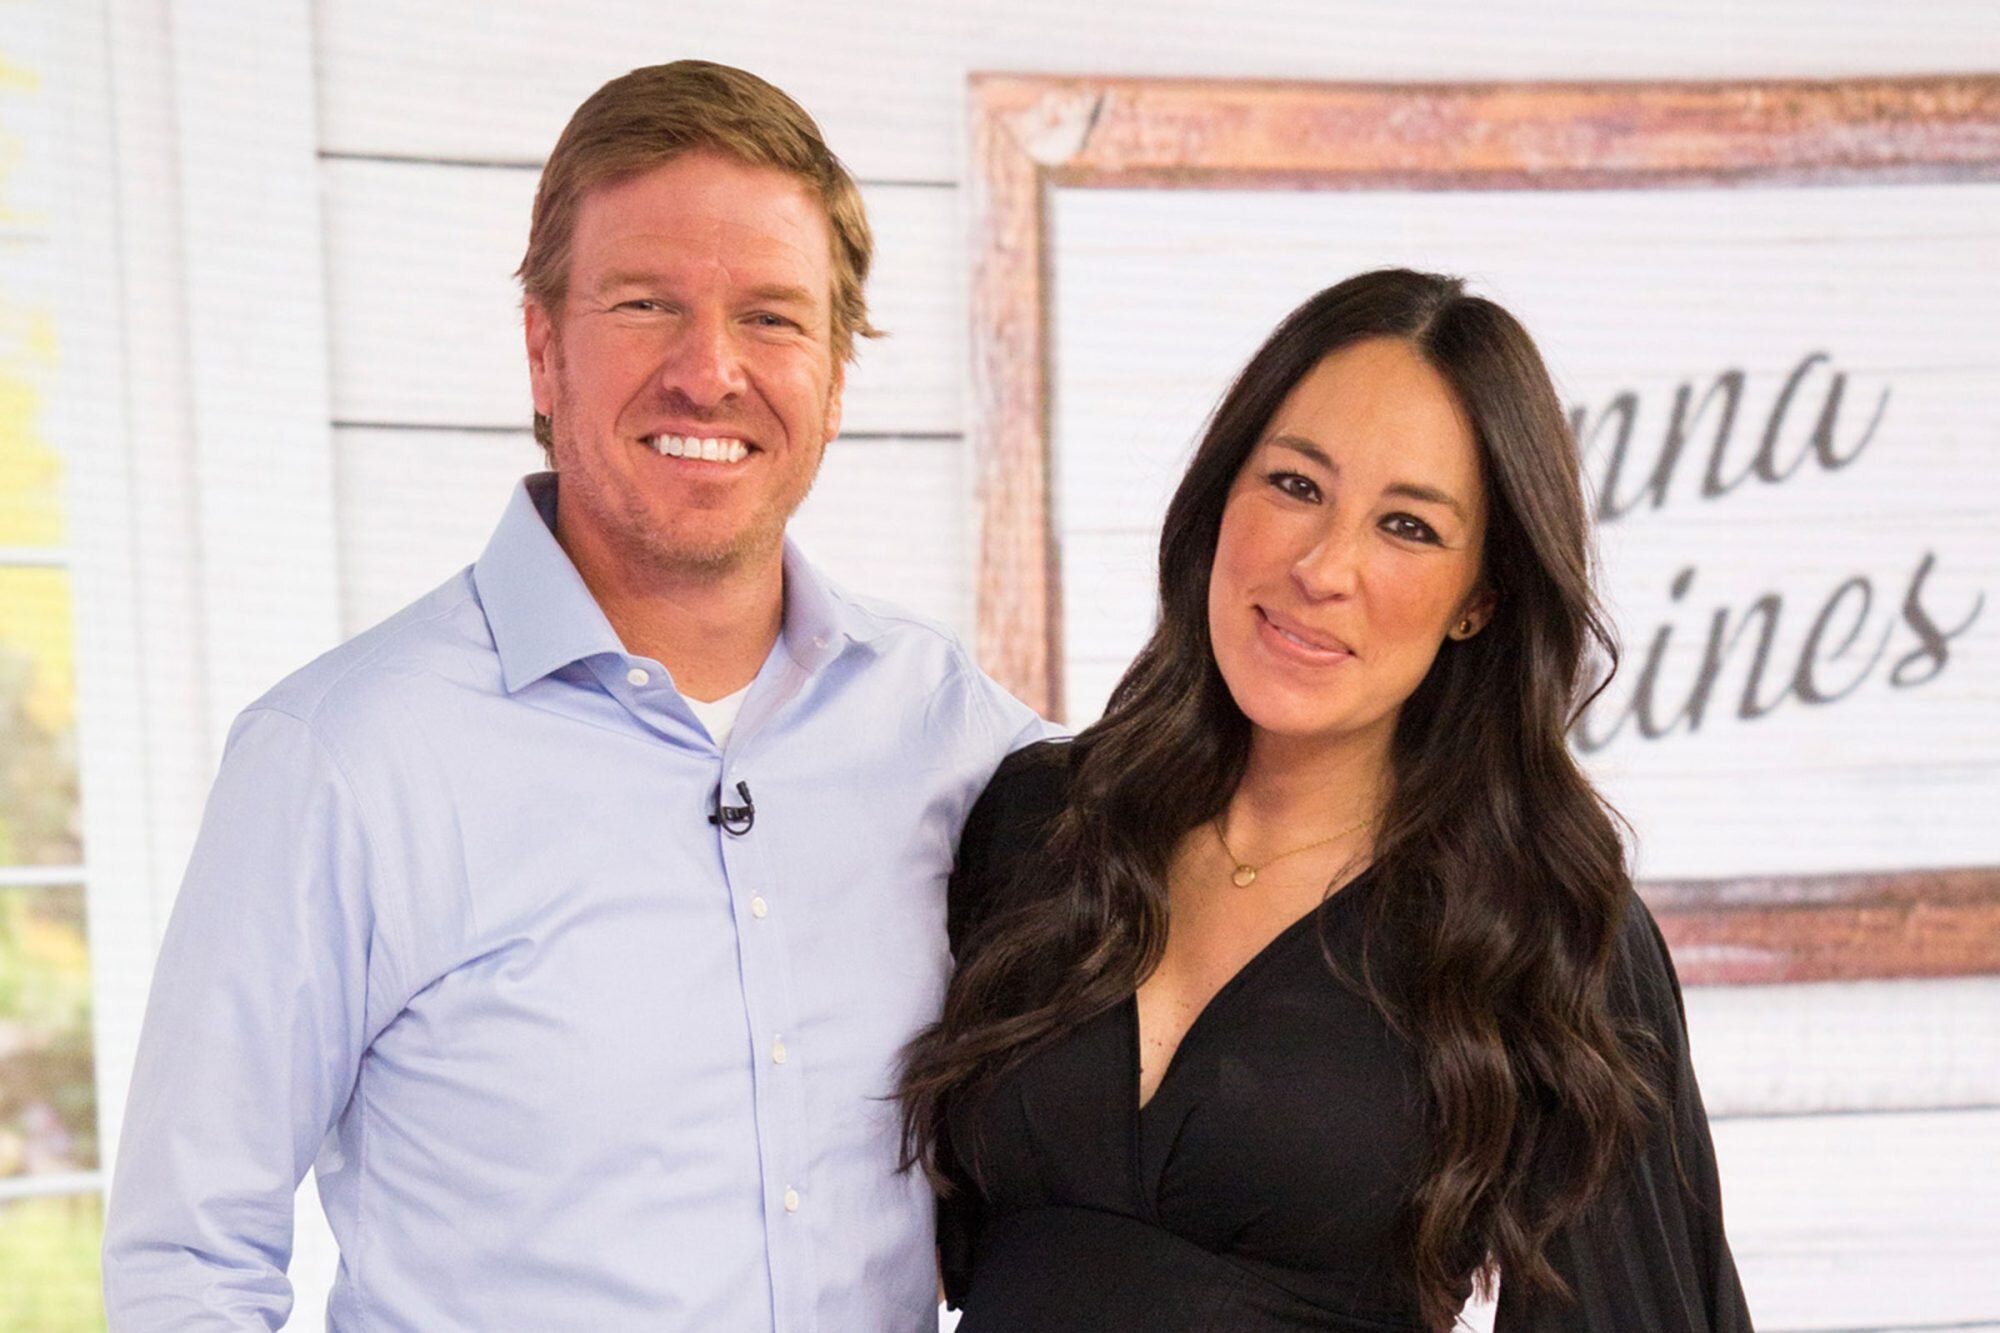 Chip and Joanna Gaines Add Three New Courses To Magnolia Workshop! Discovery+